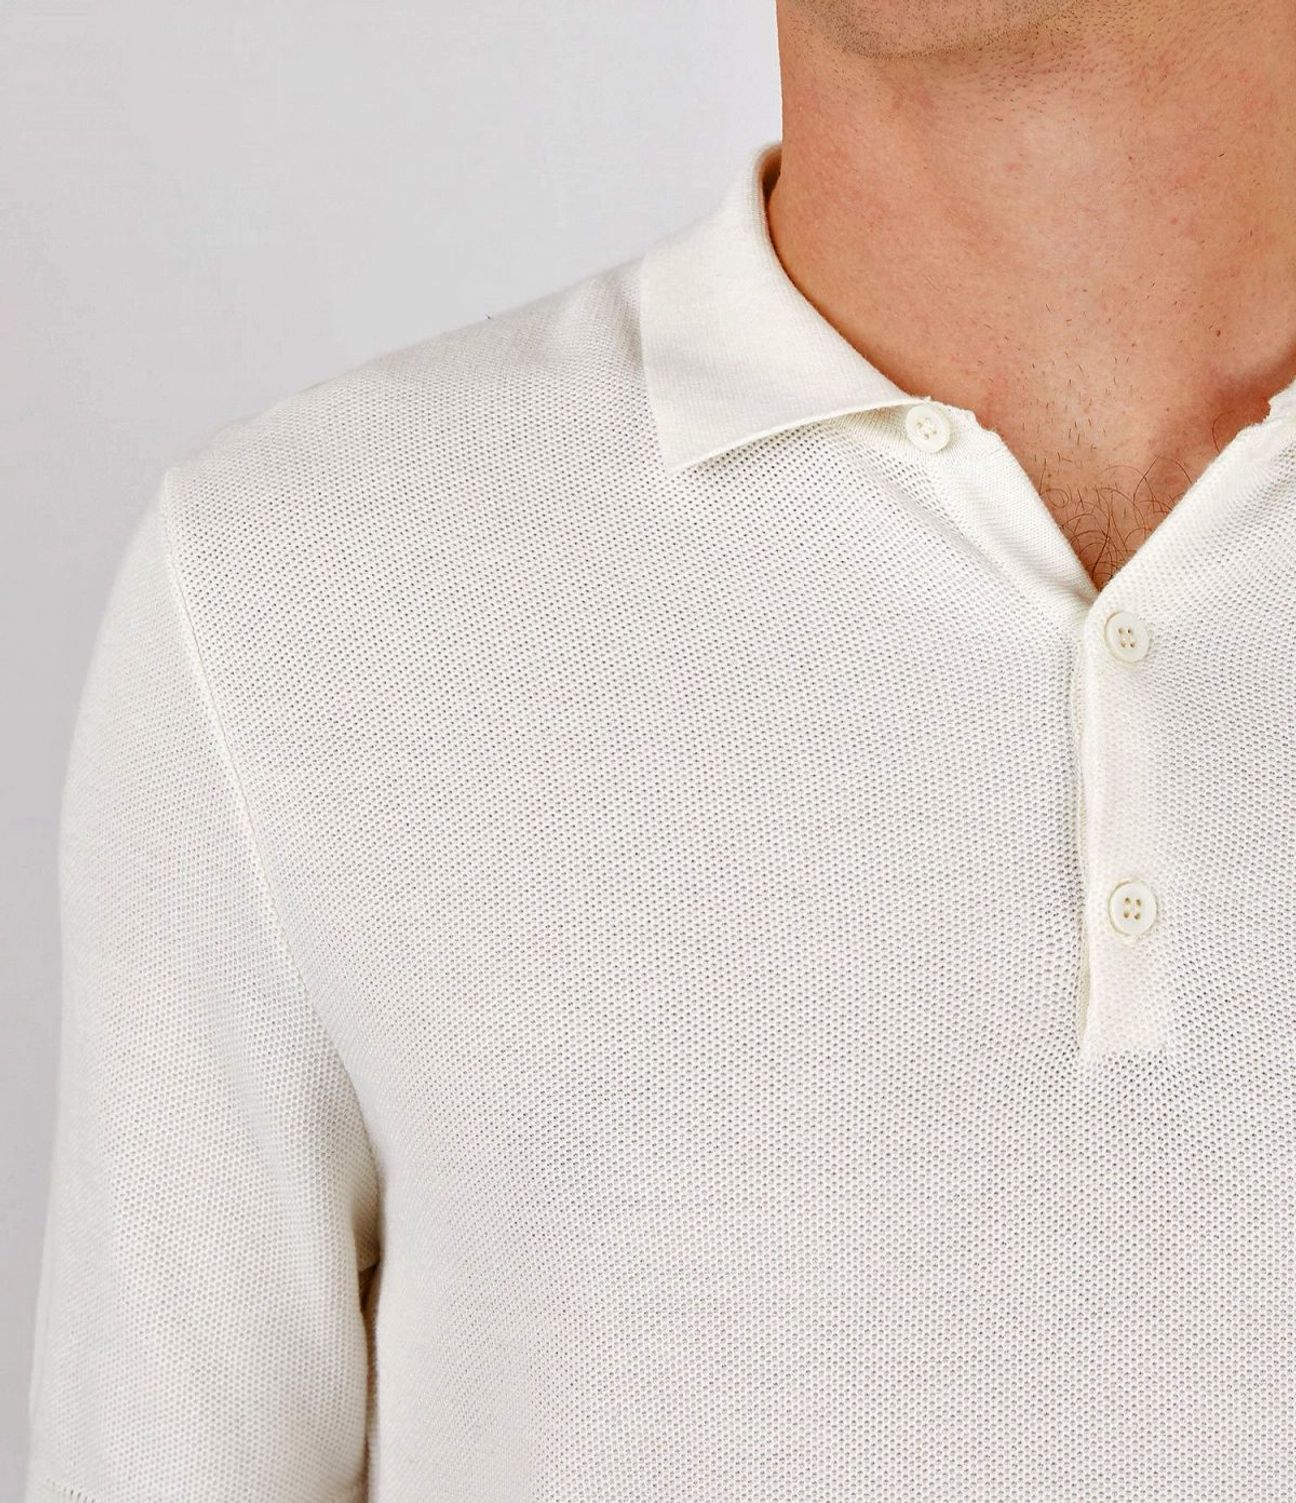 This summer, all your polo shirts should be knitted | Gentleman's Journal